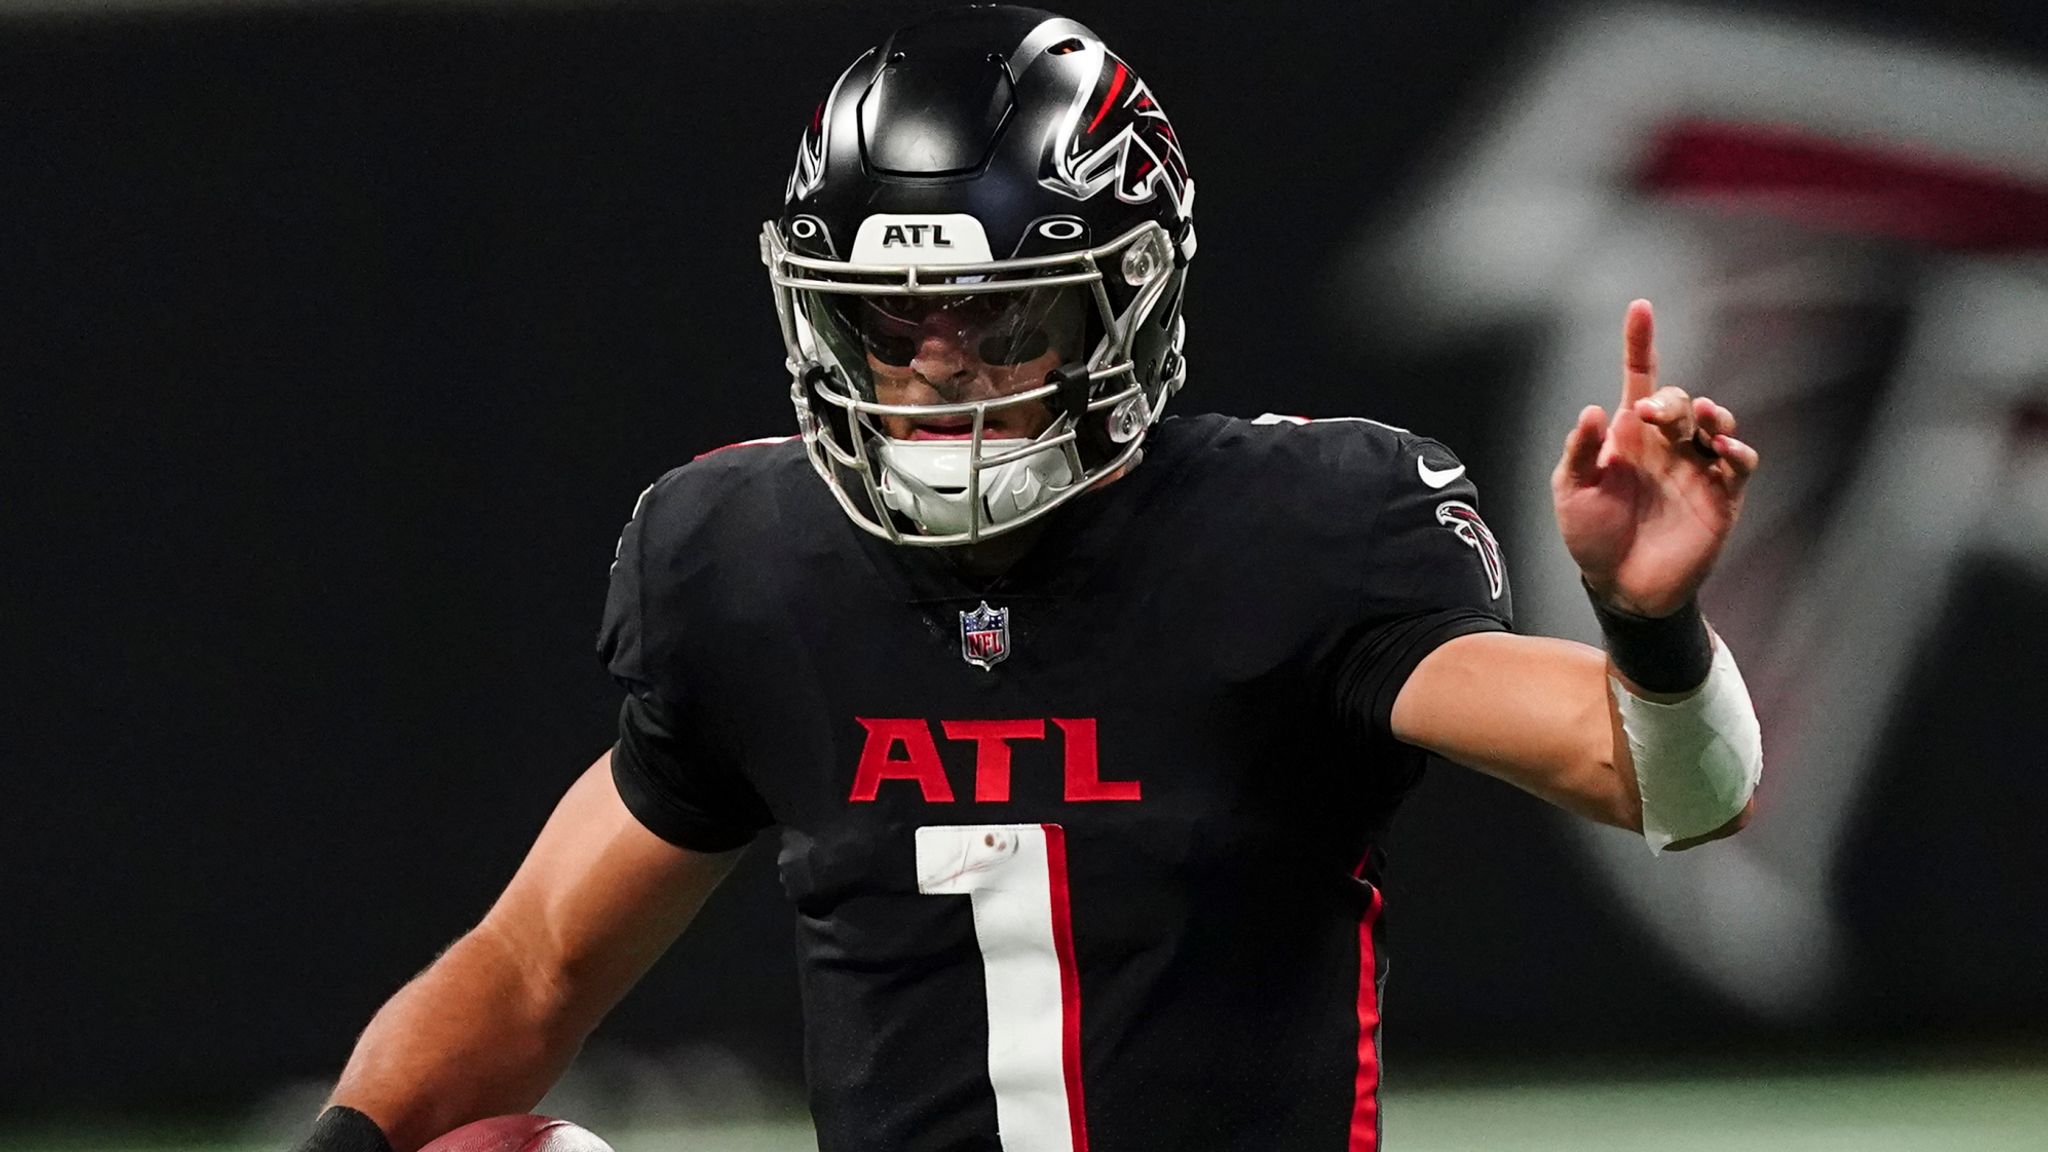 The Falcons' new jerseys made all the mistakes the Buccaneers didn